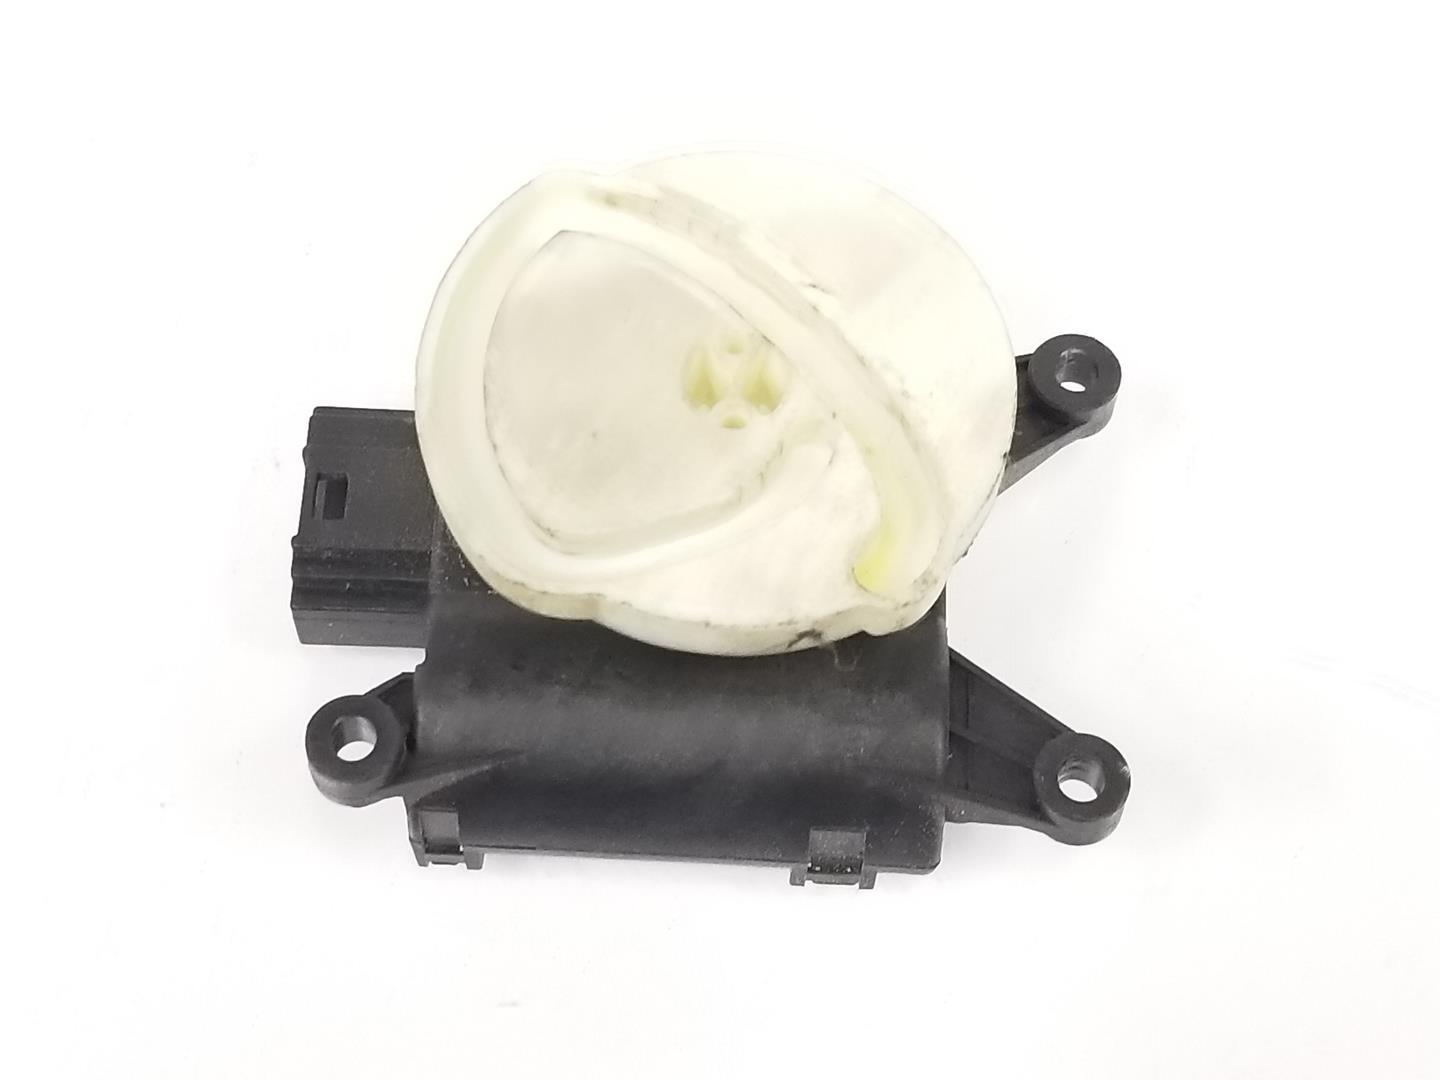 SEAT Exeo 1 generation (2009-2012) Other Control Units 8E1820511C, 0132801302 19934218